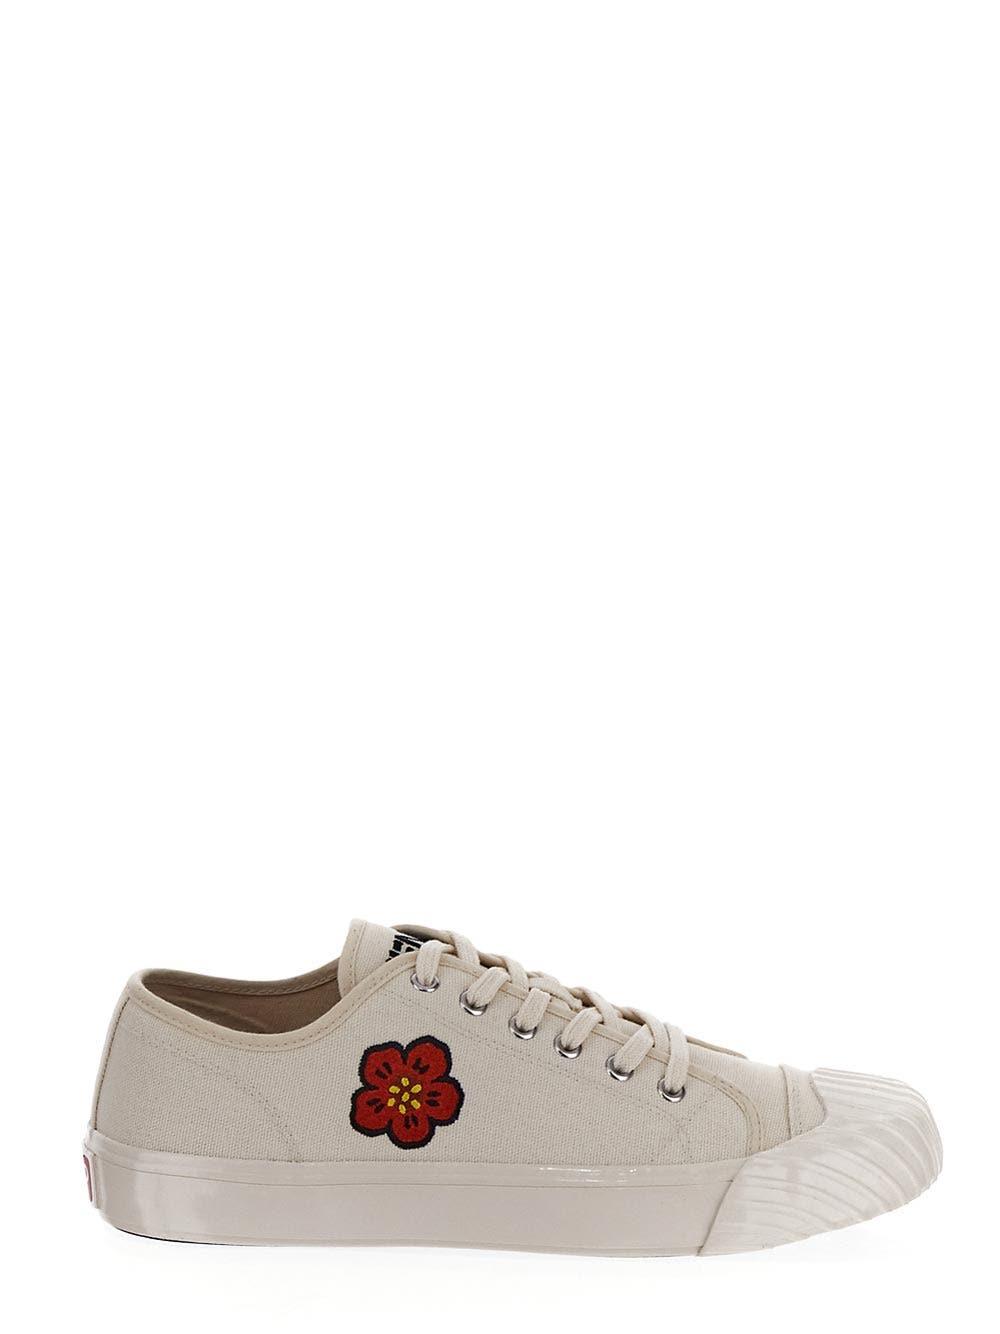 Kenzo Low Top Sneakers In White